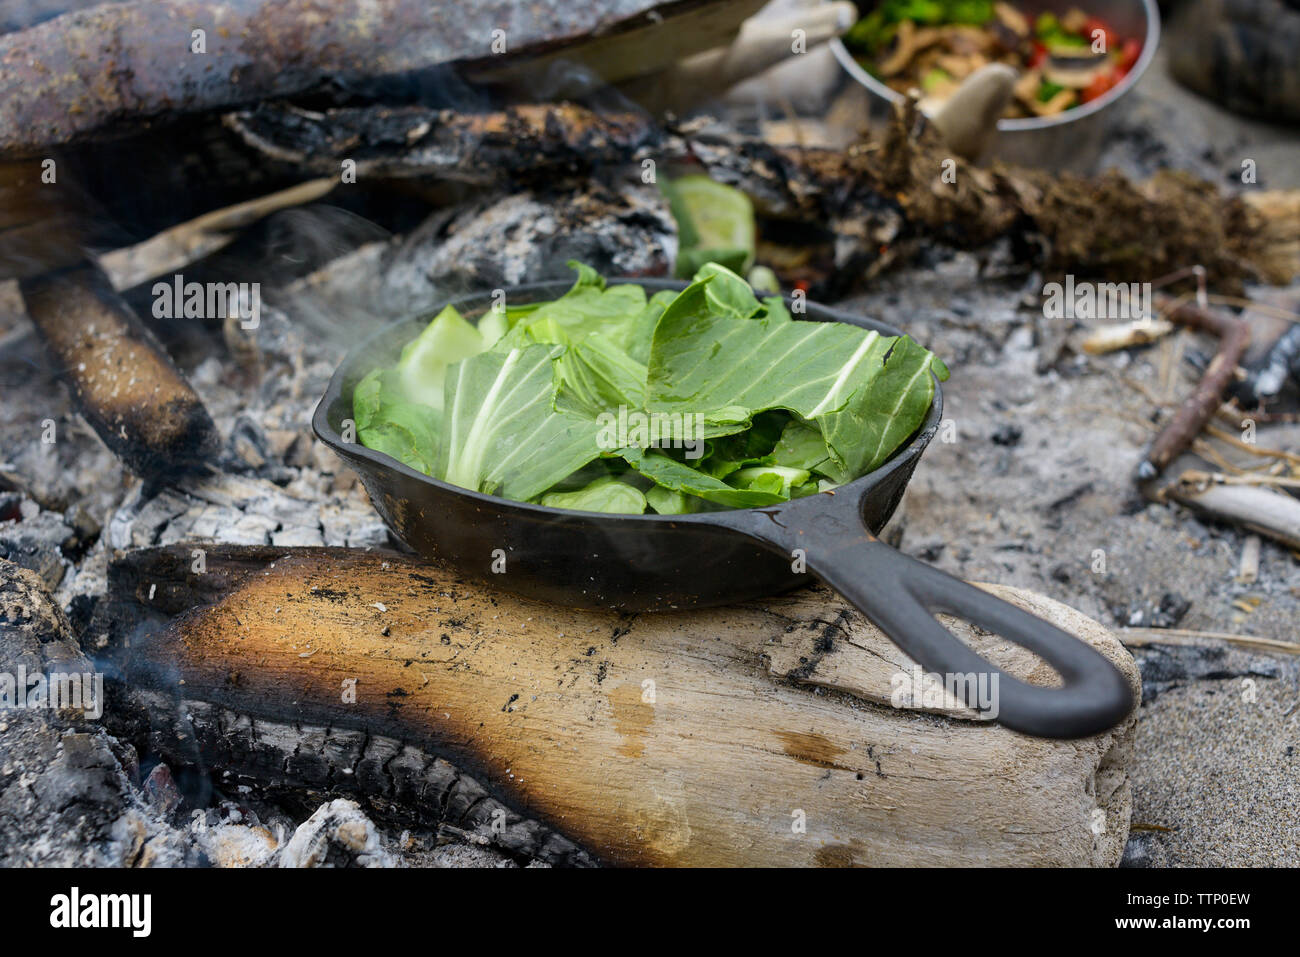 Cabbage in cooking utensil at campsite Stock Photo